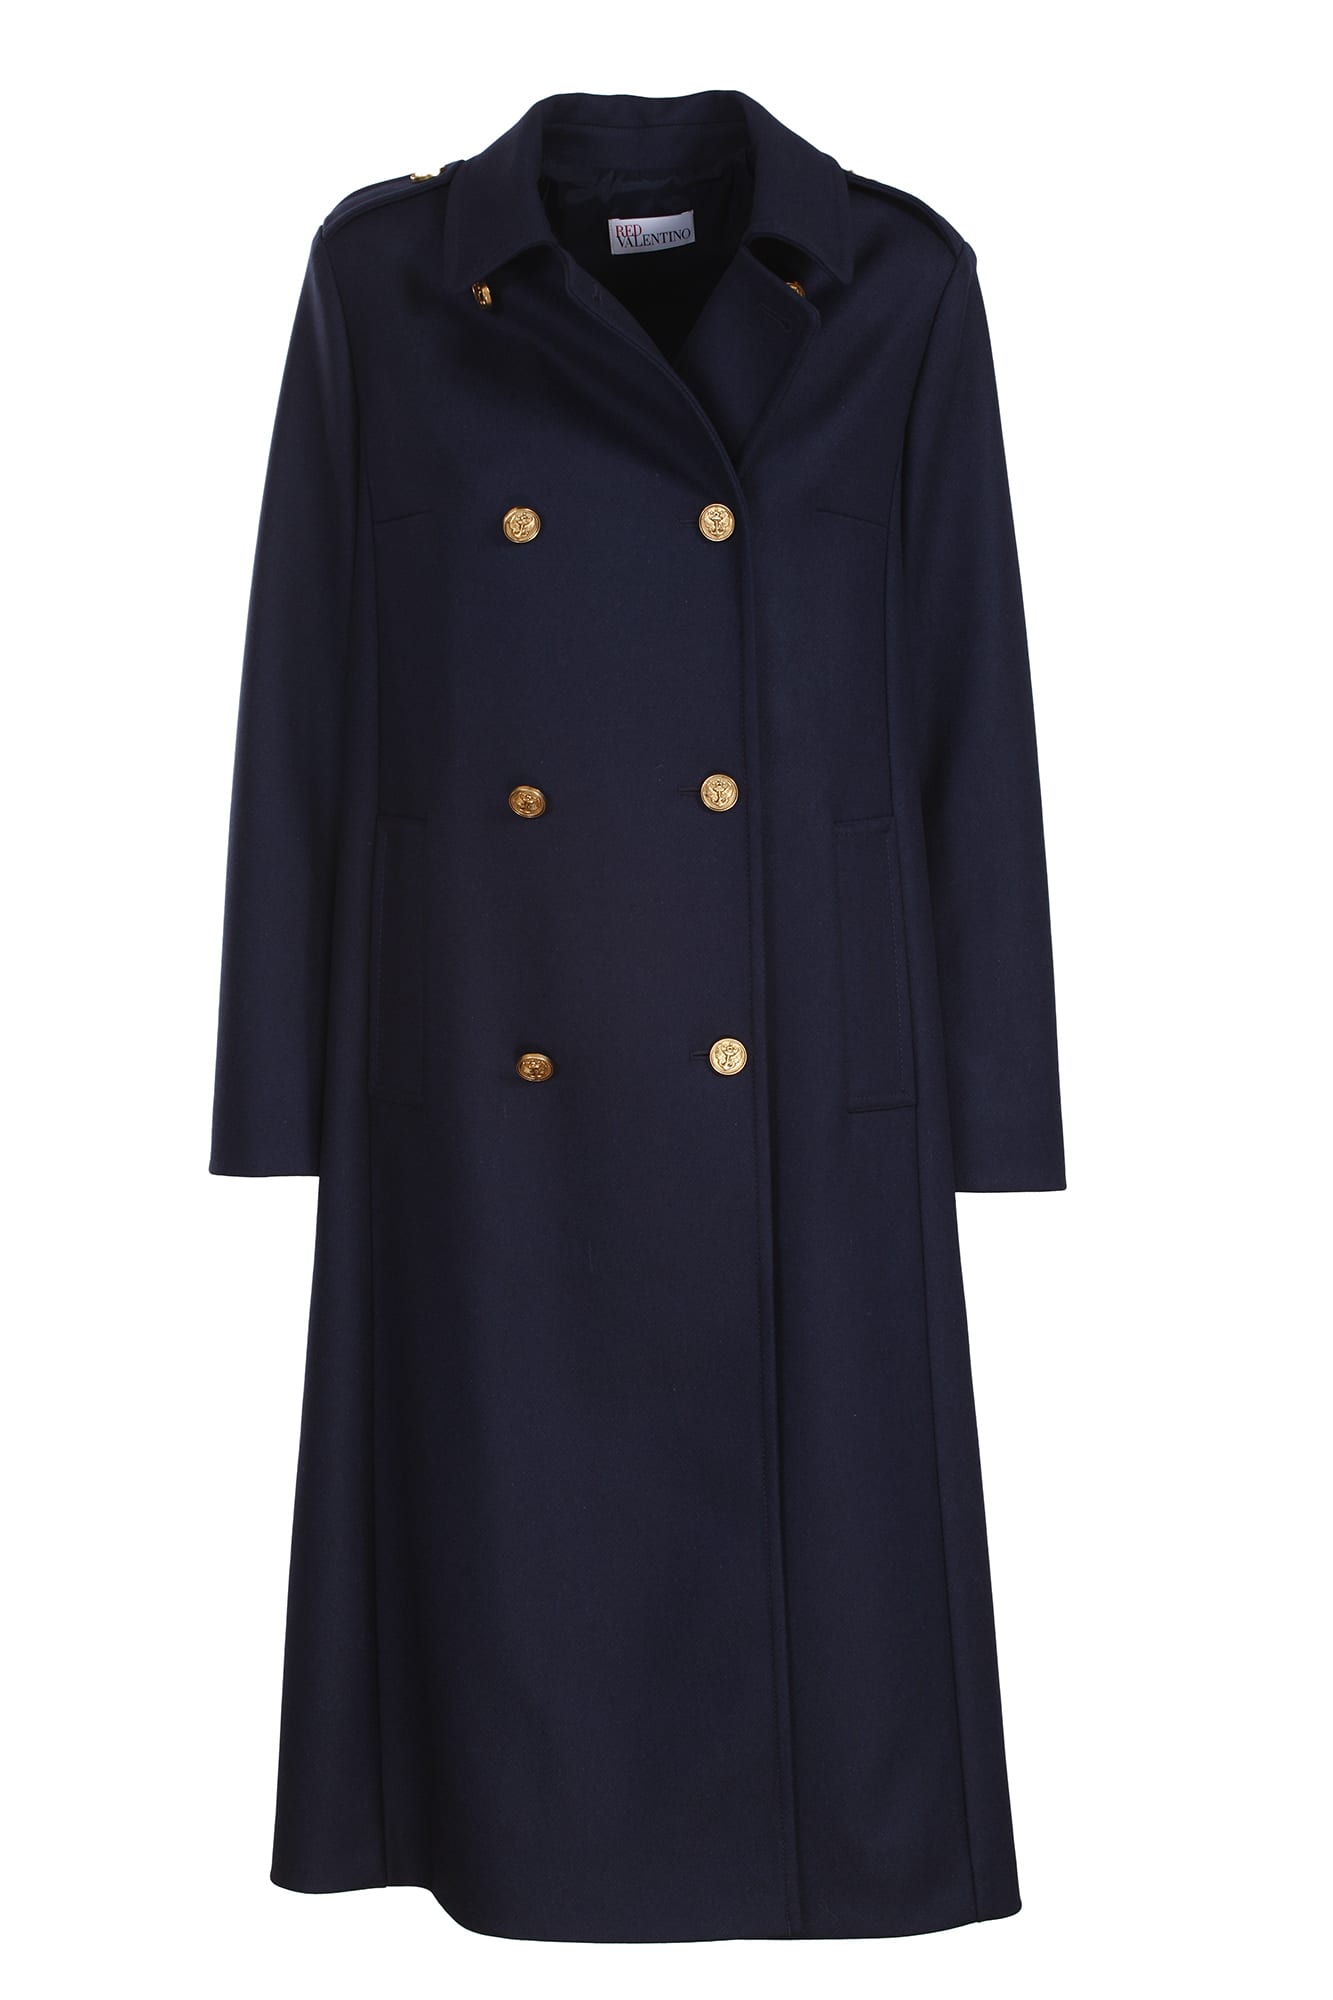 RED Valentino double-breasted coat, blue, in wool cloth